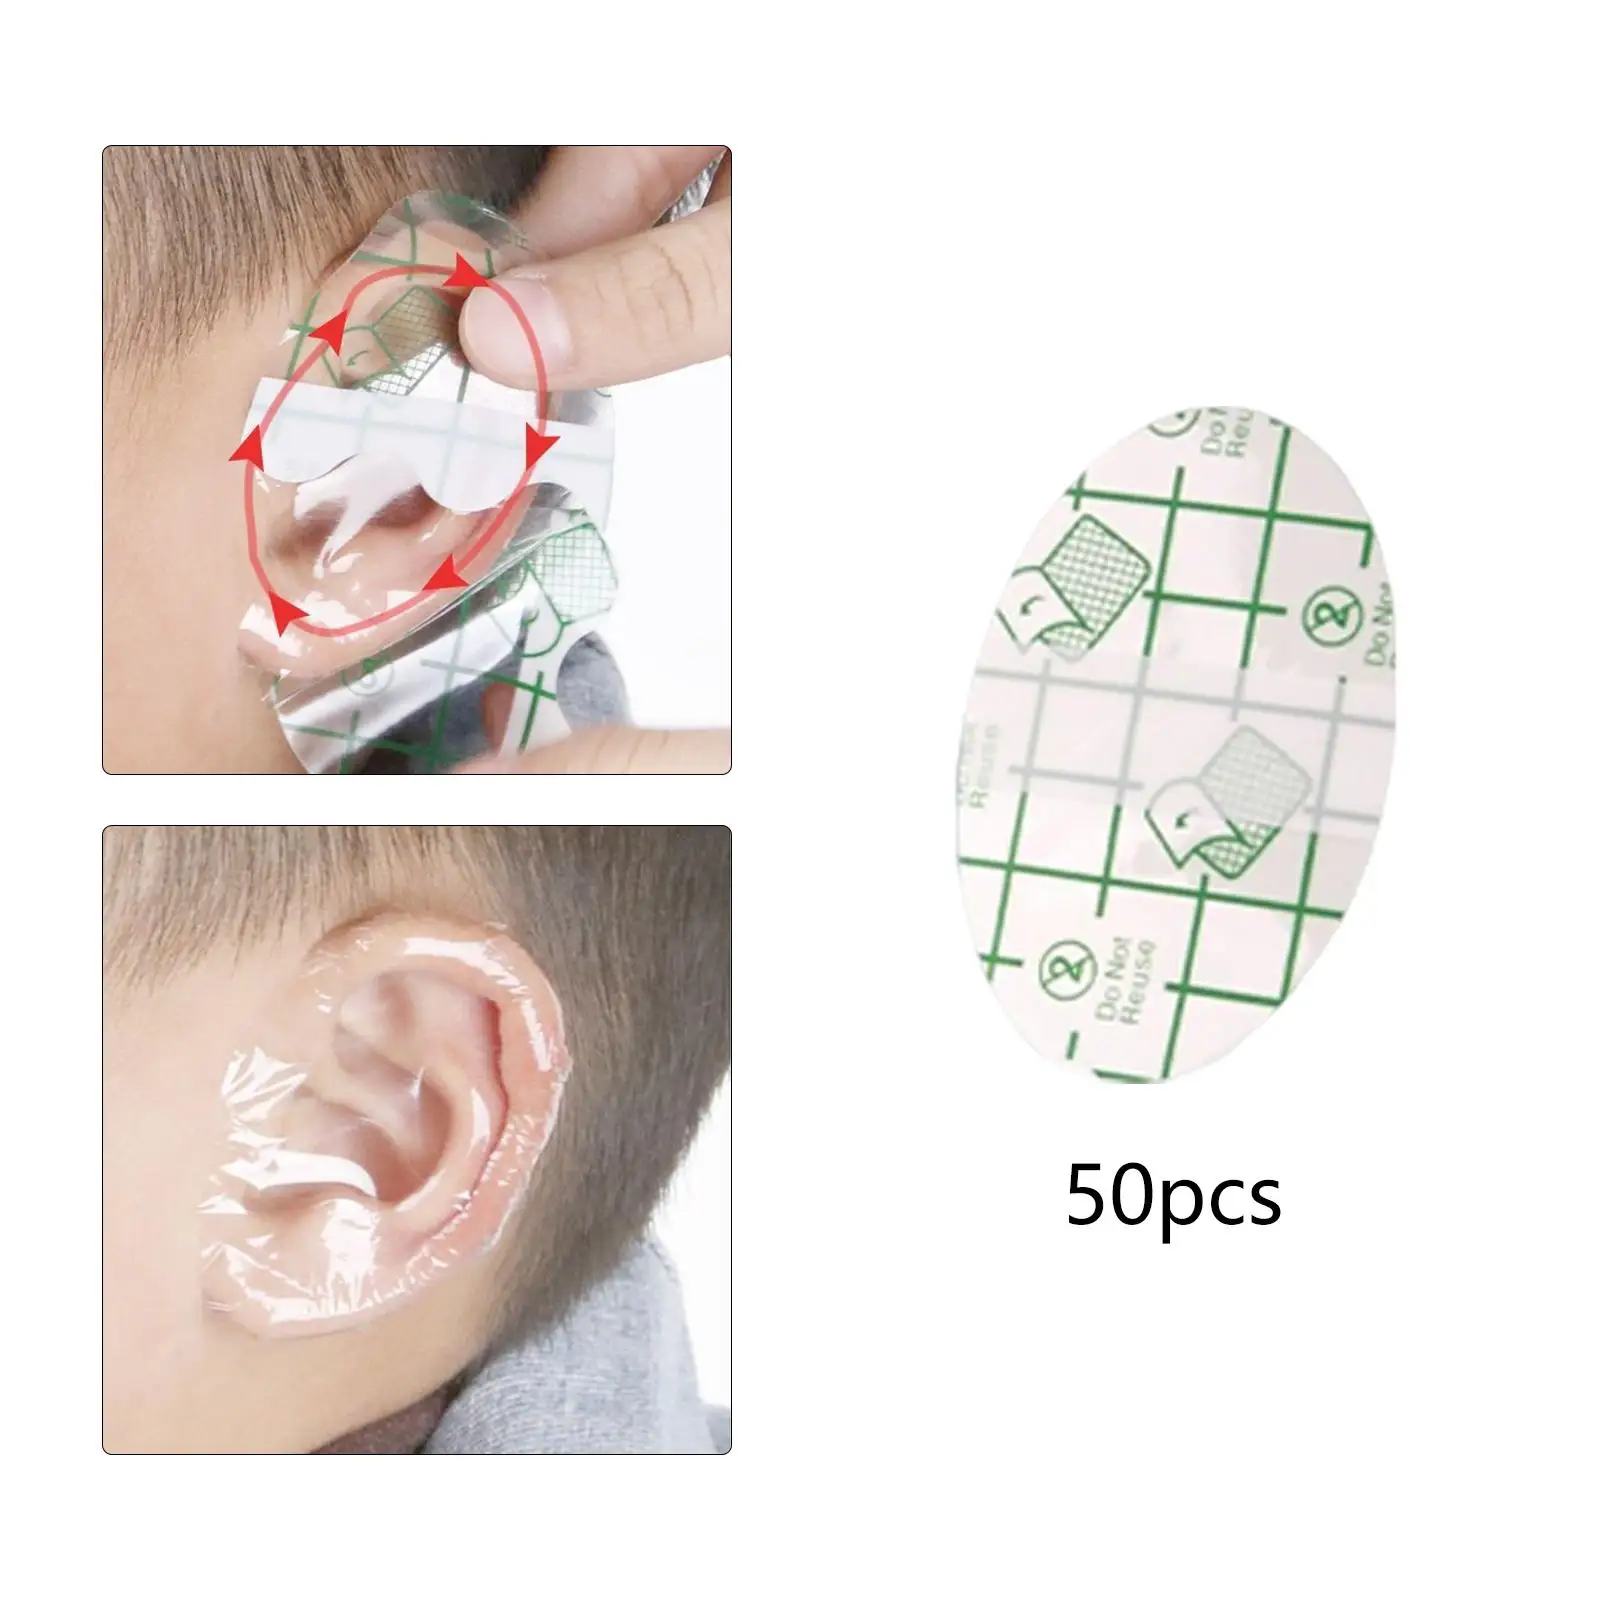 Baby Waterproof Ear Covers Disposable Portable Ear Protection Covers for Shower Swimming Bathing Snorkeling Newborn